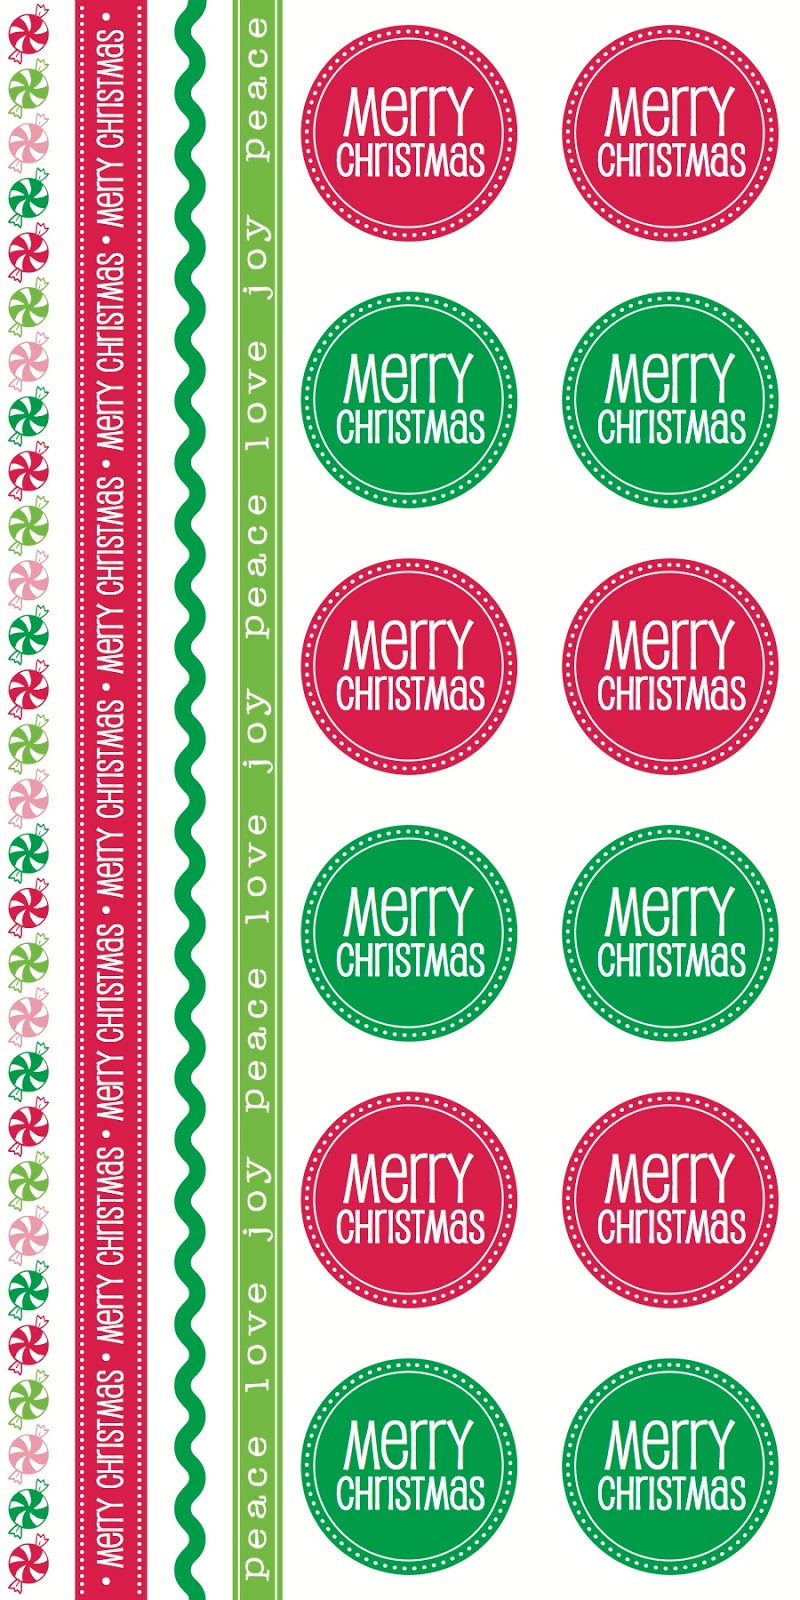 SRM Stickers BLog - New Product Reveal Stickers - #stickers #Take2 #Christmas